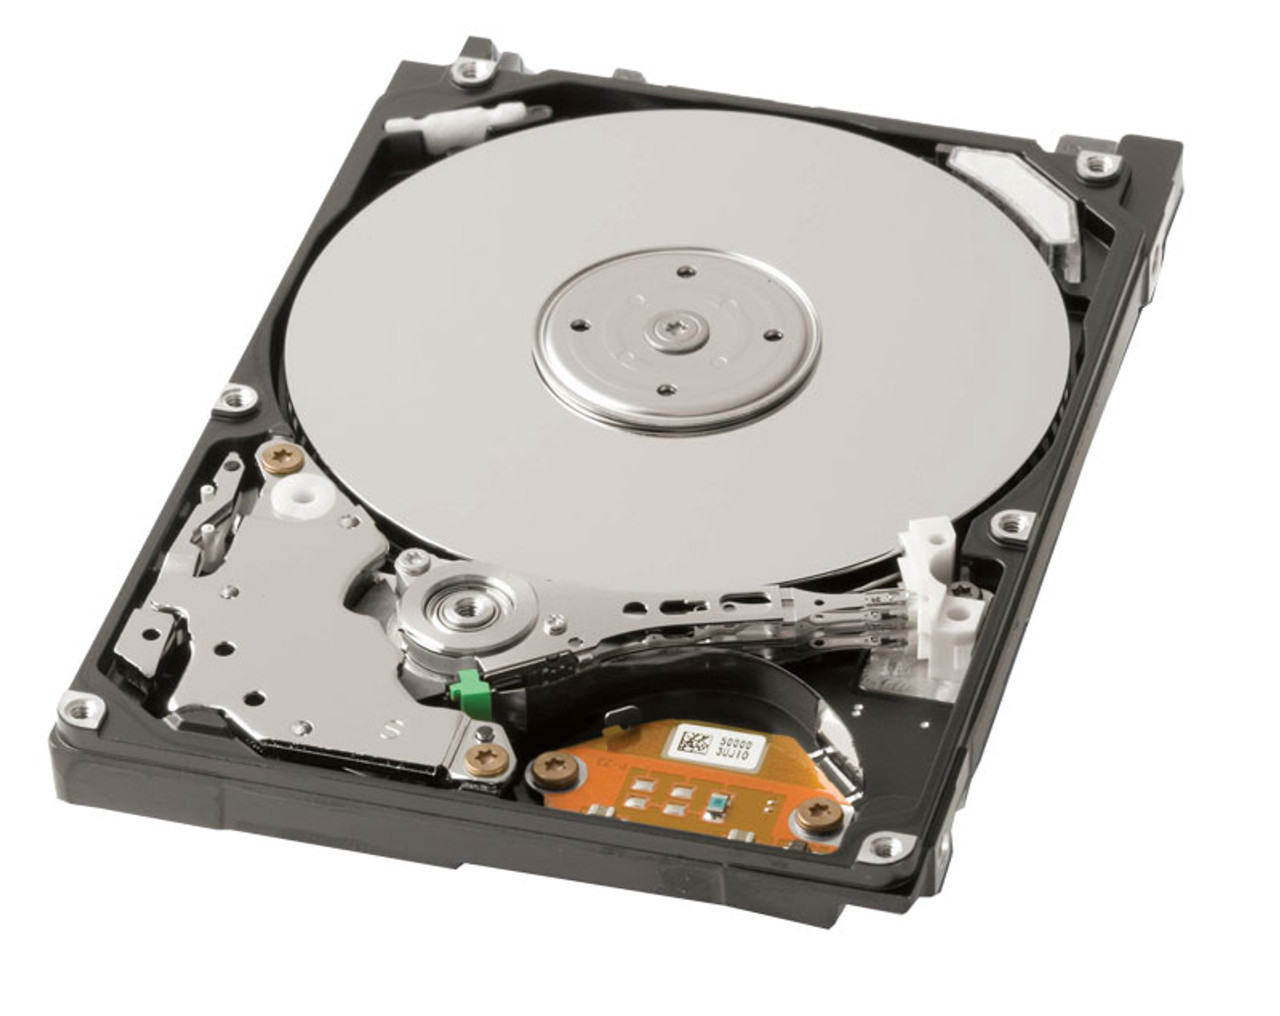 3R120-U Dell 73GB 15000RPM Ultra-320 SCSI 80-Pin Hot Swap 8MB Cache 3.5-inch Internal Hard Drive with Tray